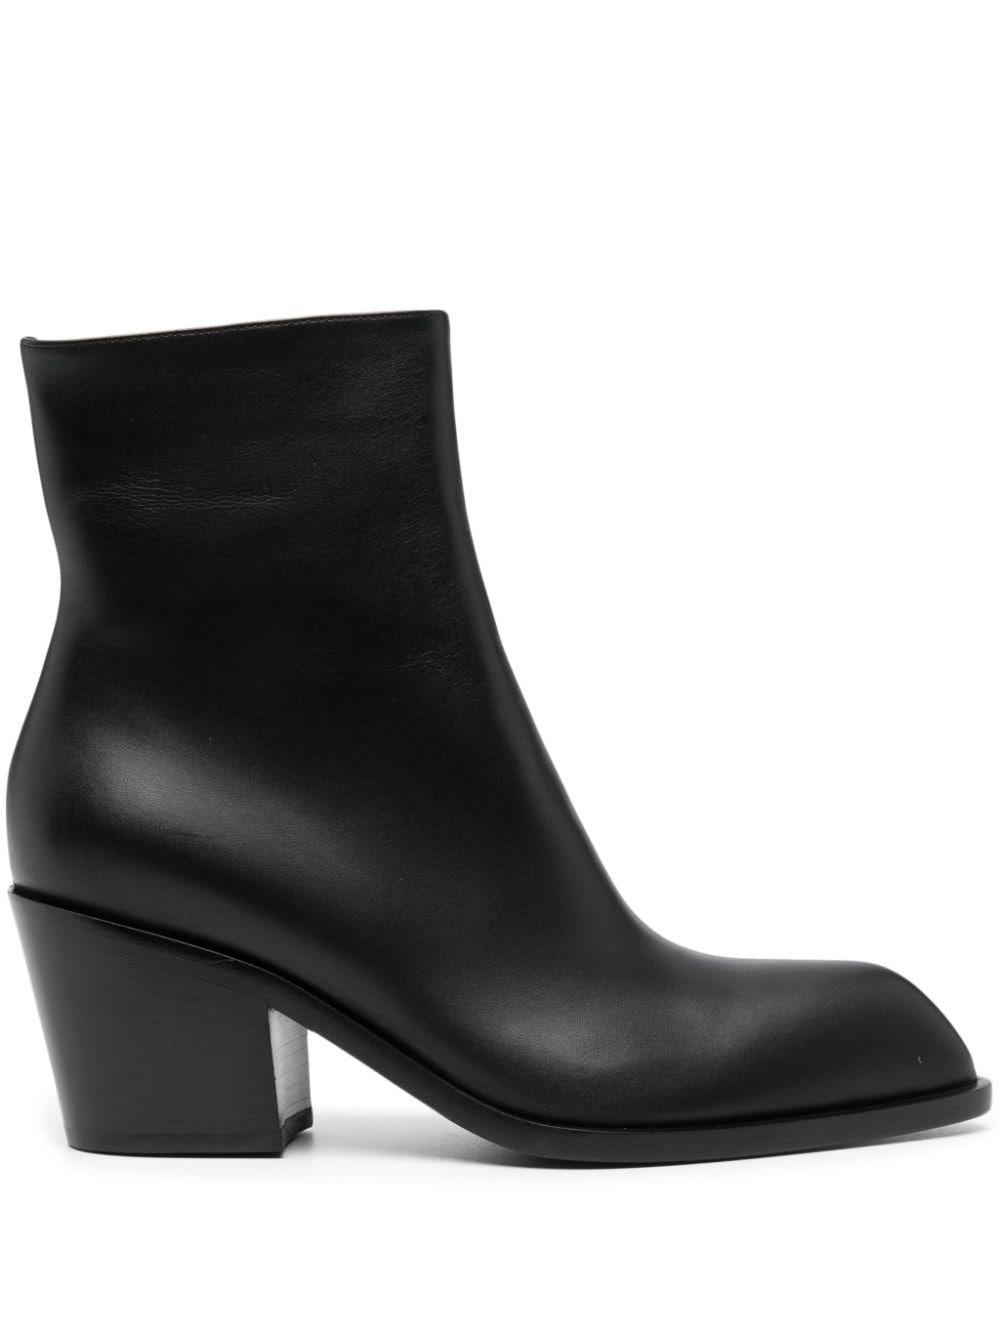 Gianvito Rossi Daisen 65mm Ankle Leather Boots in Black | Lyst